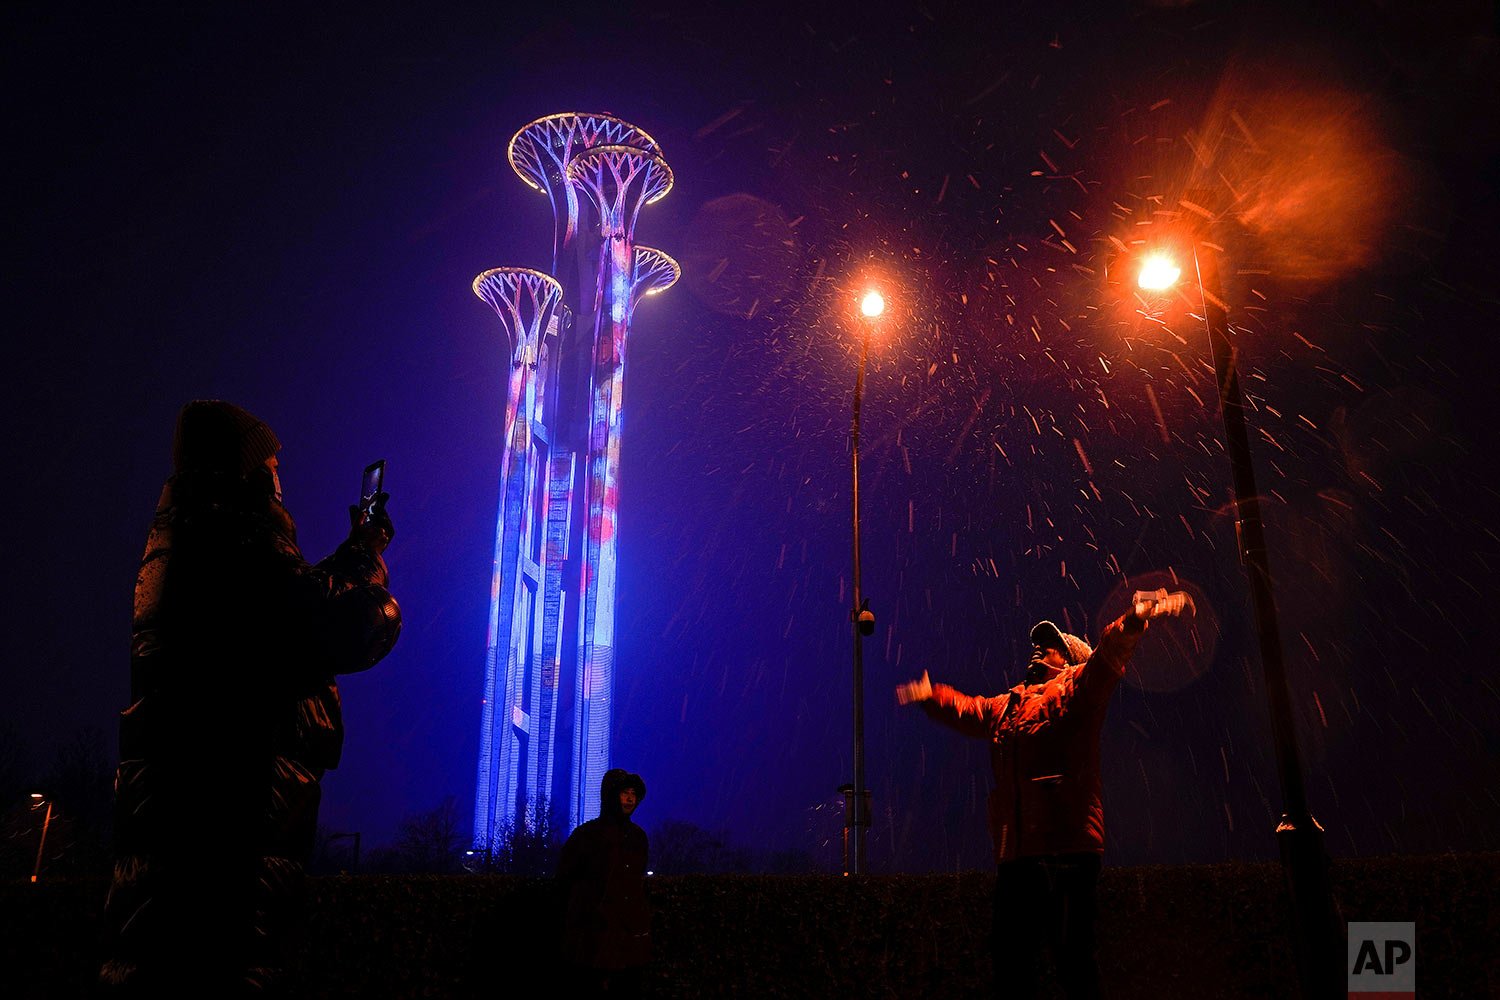  Residents film as snow falls near the illuminated Beijing Olympic Tower, at the 2022 Winter Olympics in Beijing, Sunday, Jan. 30, 2022. (AP Photo/Andy Wong) 